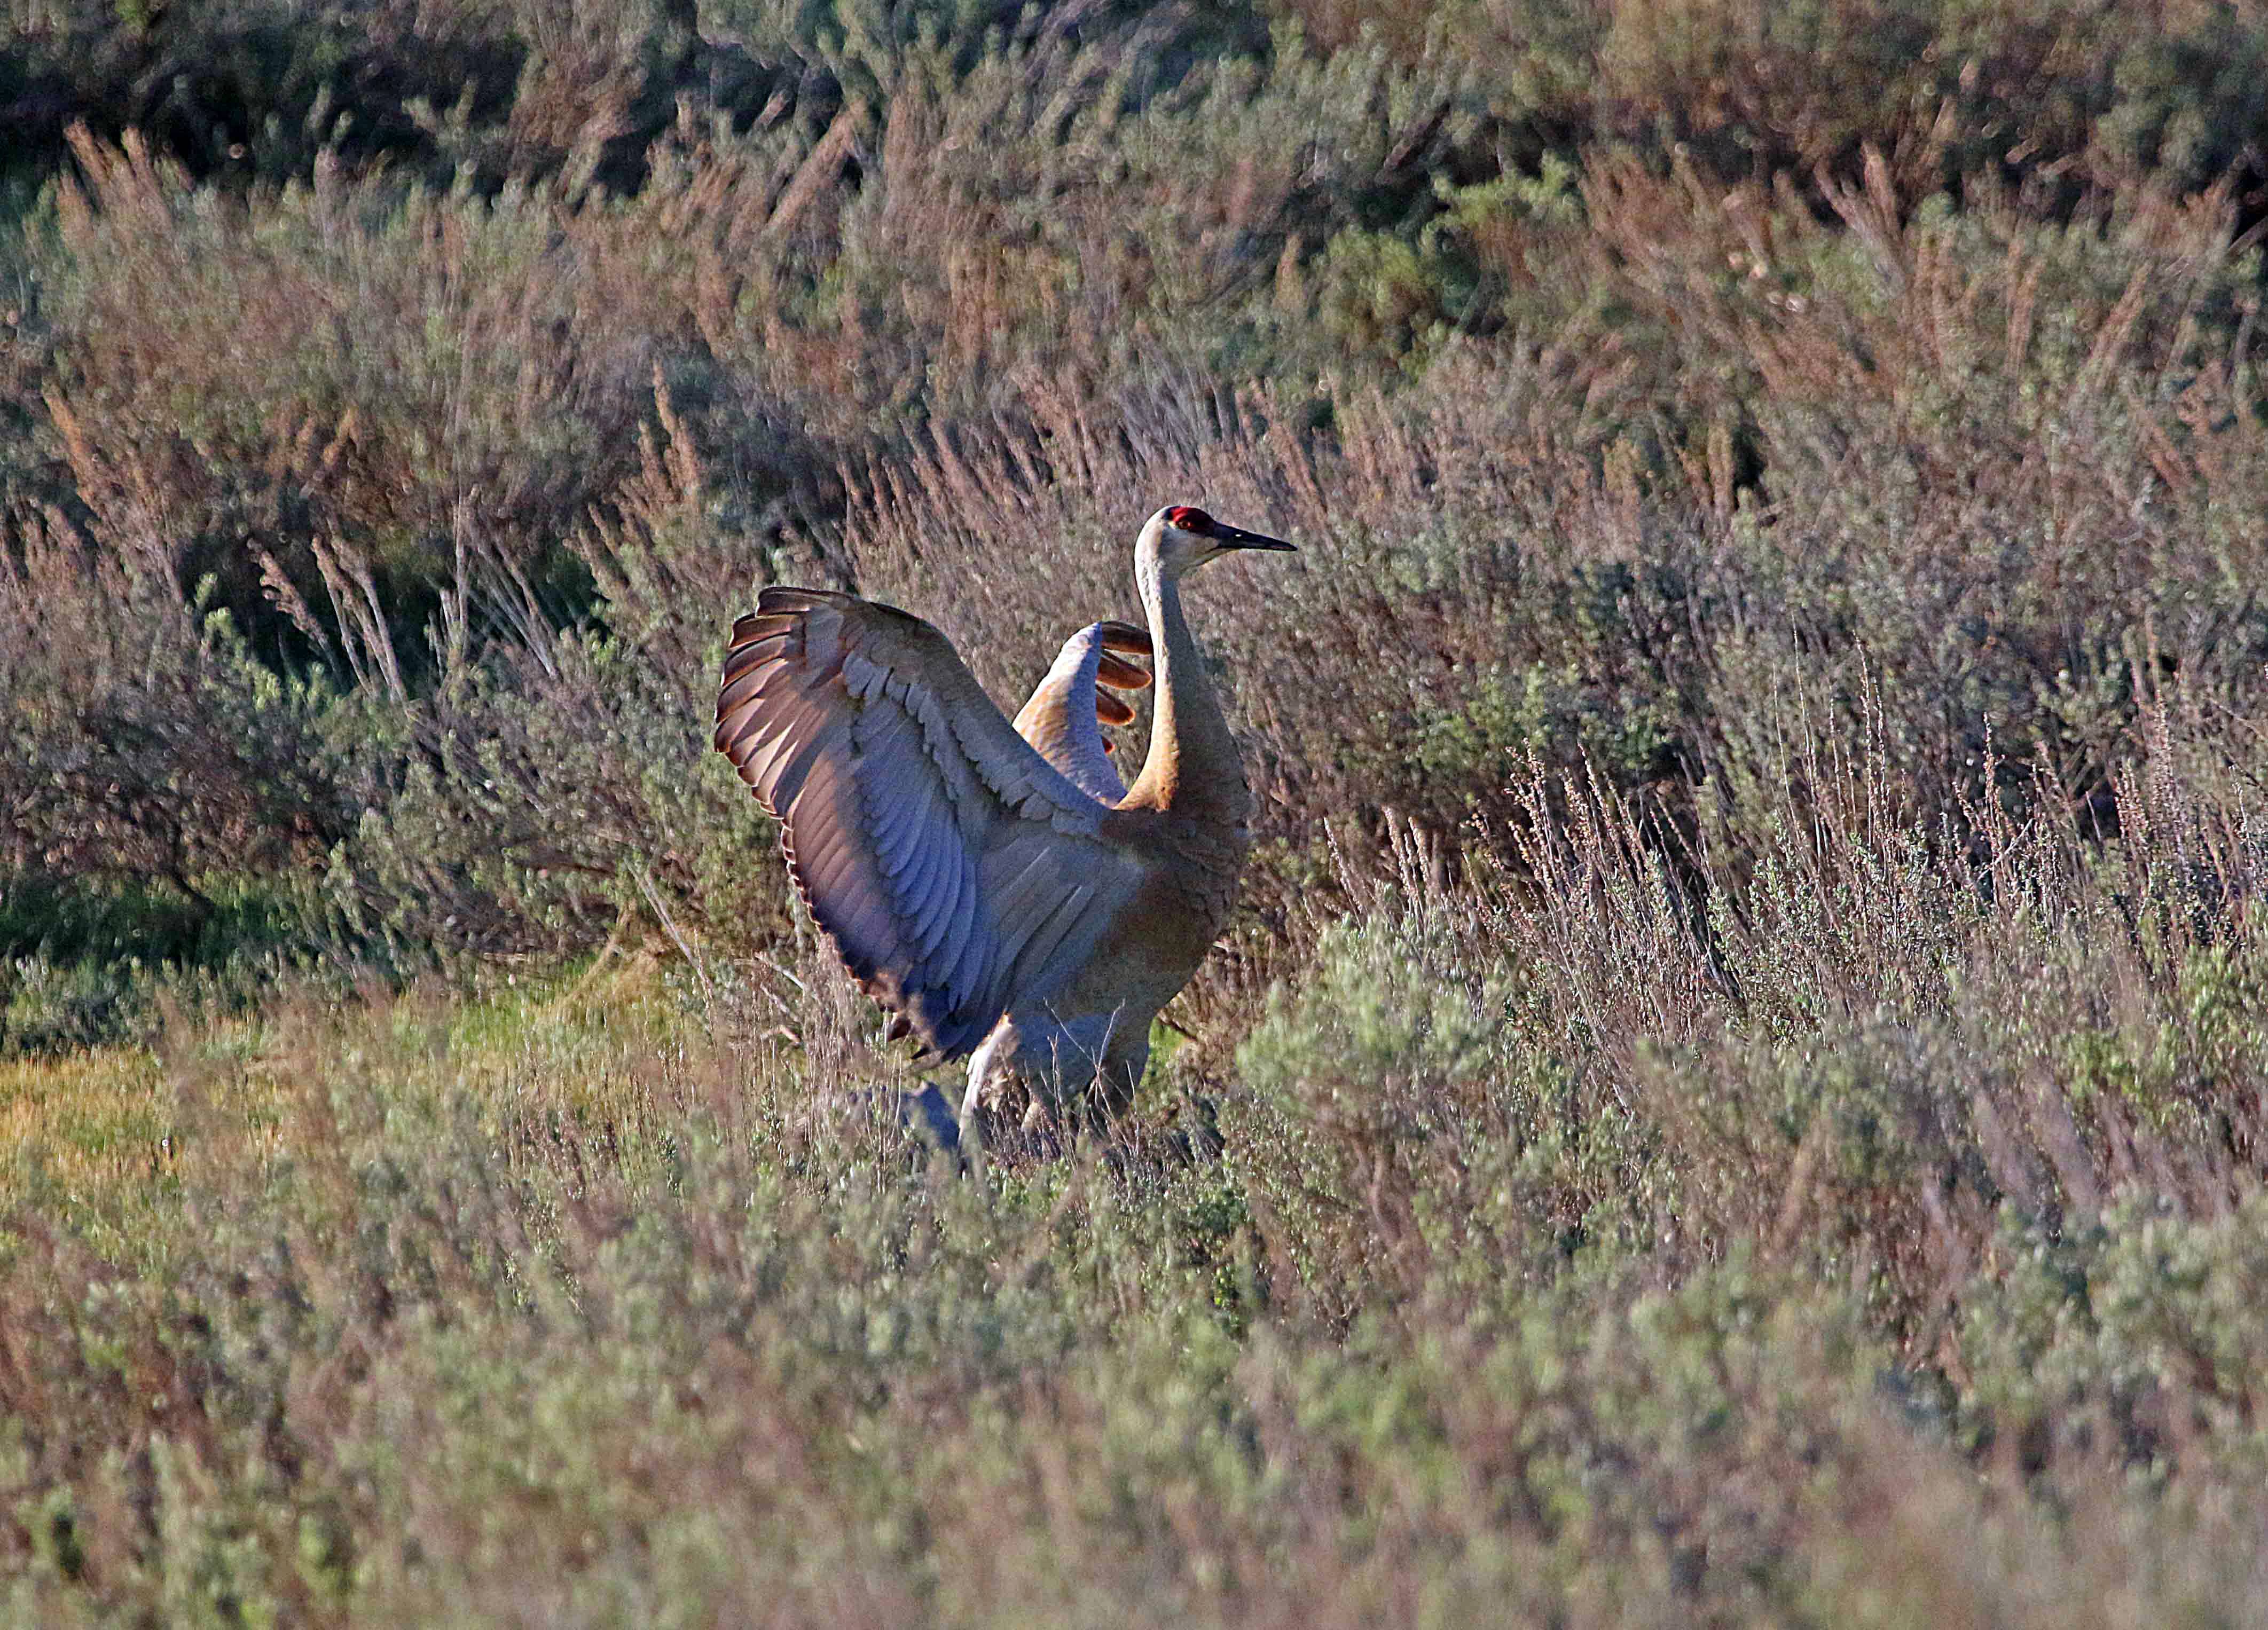 Come see sandhill cranes in the wild at DWR events this fall